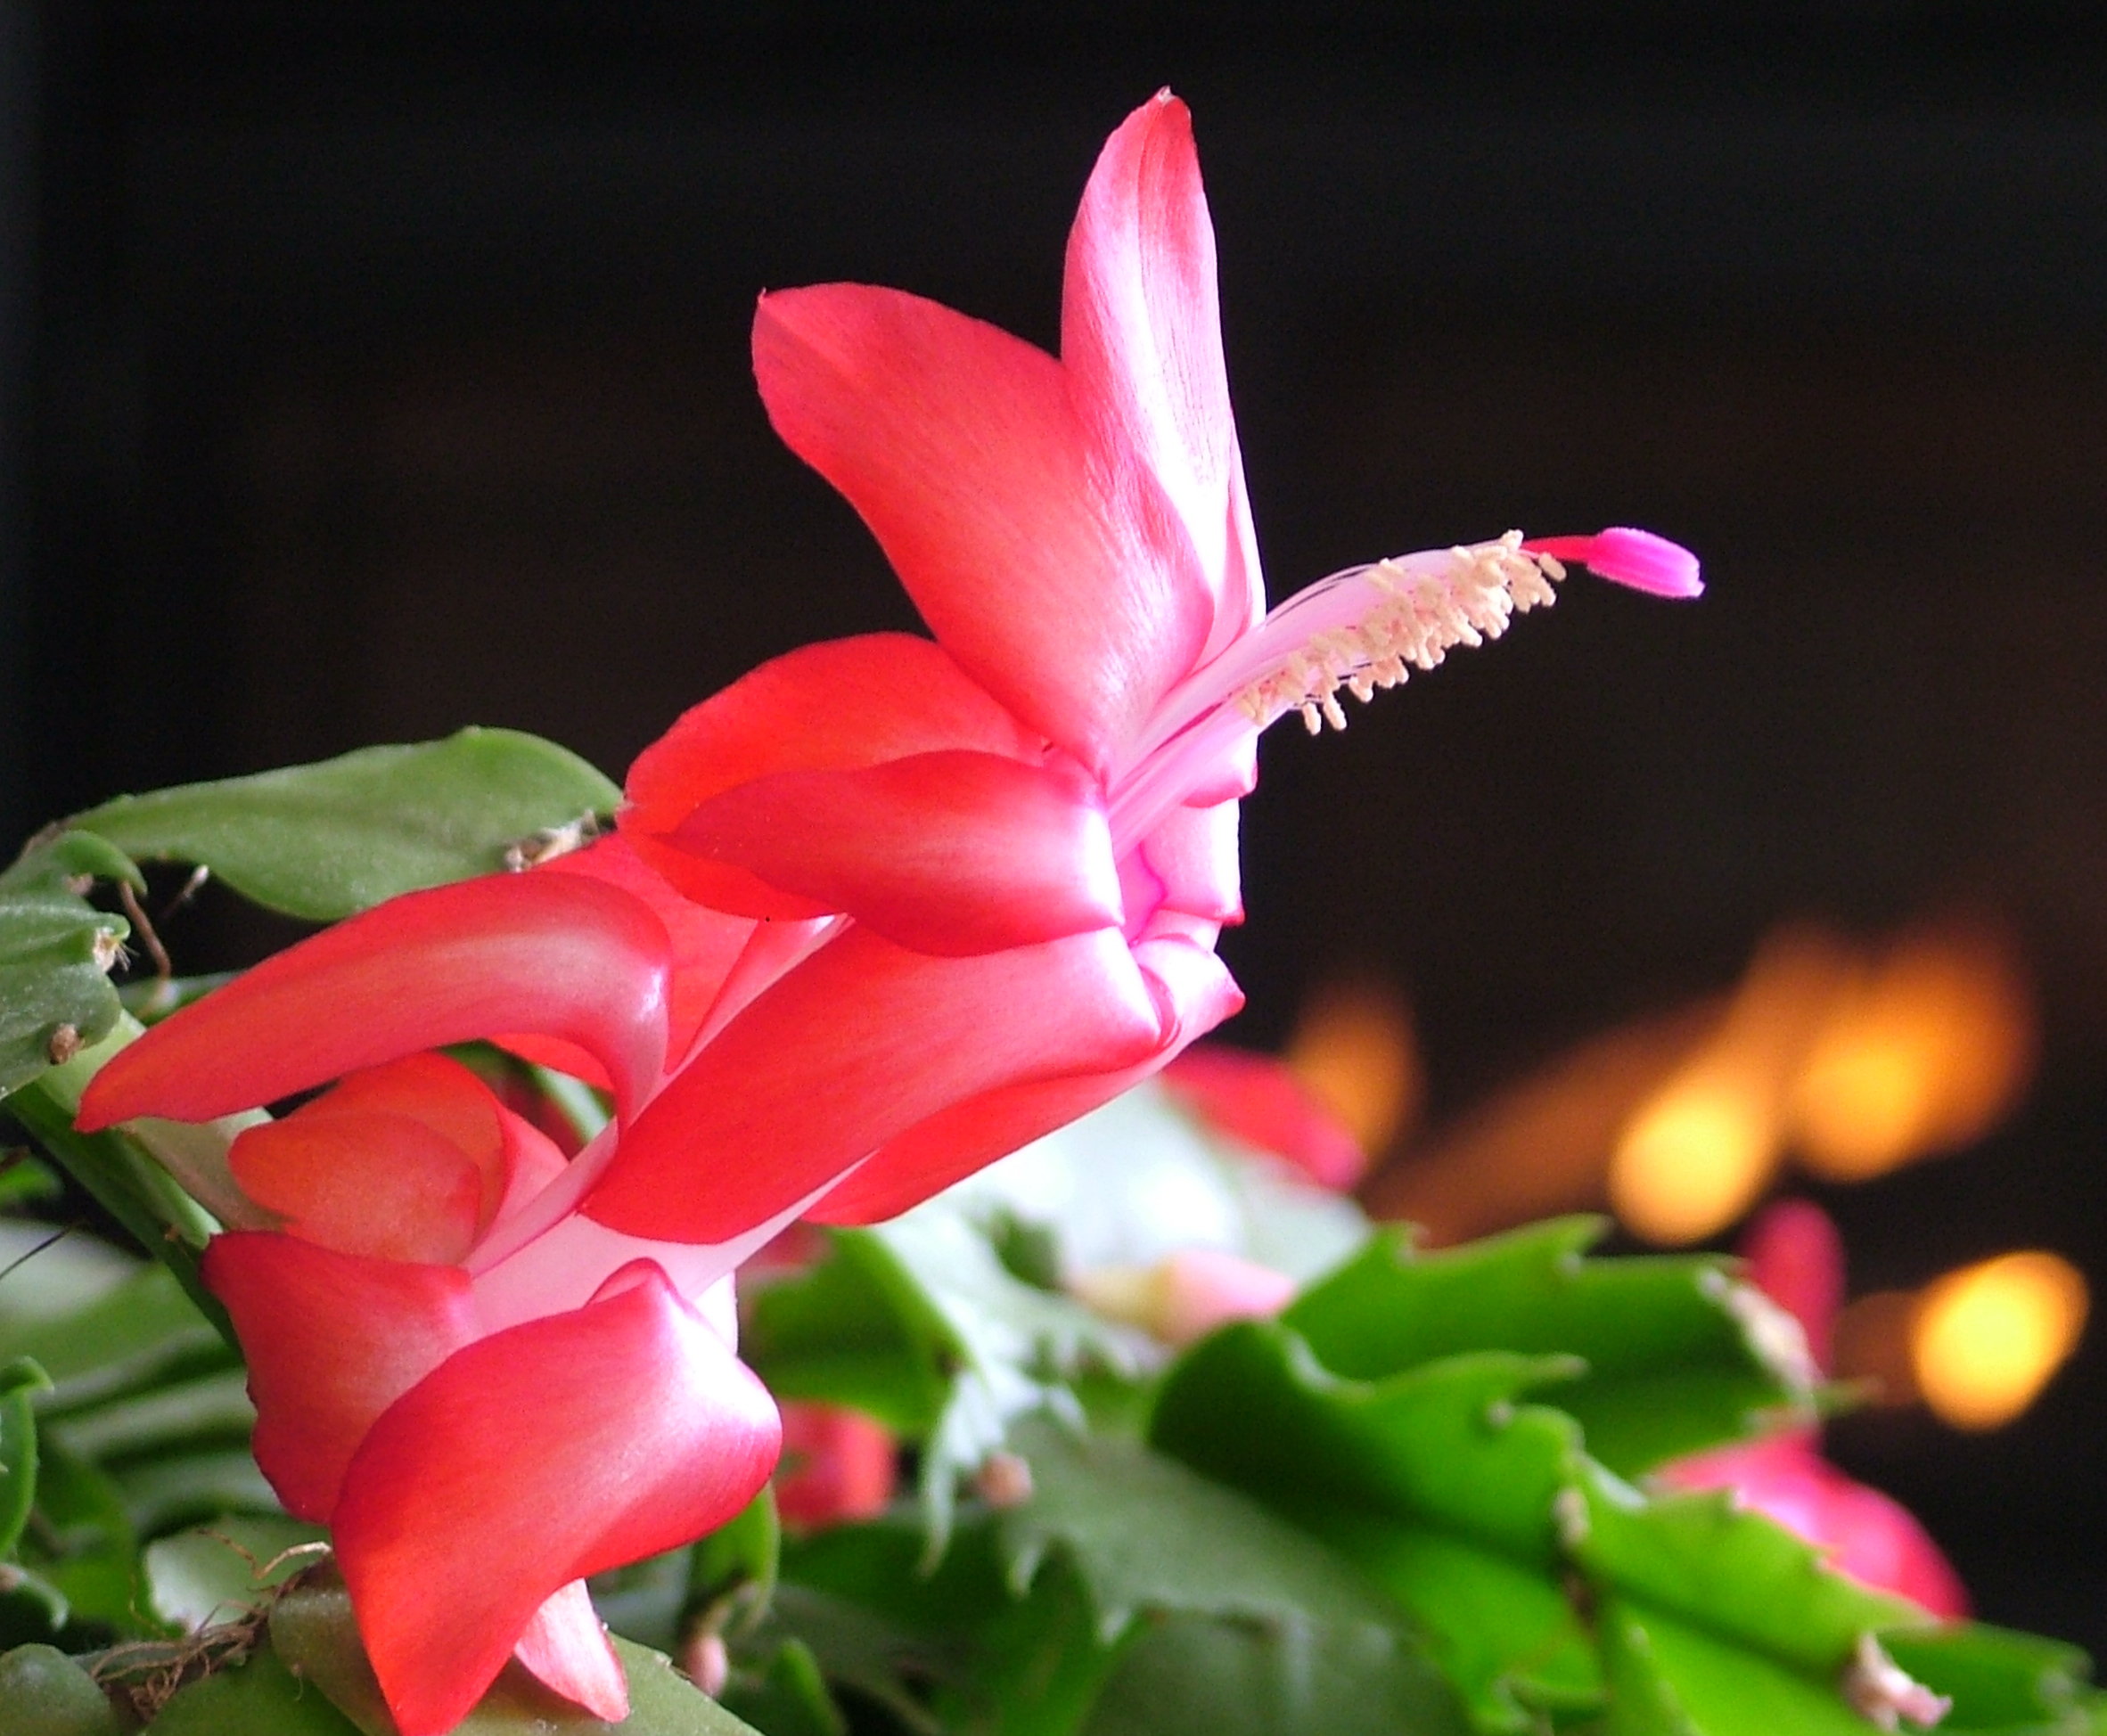 Winter Cactus Bloom (user submitted)